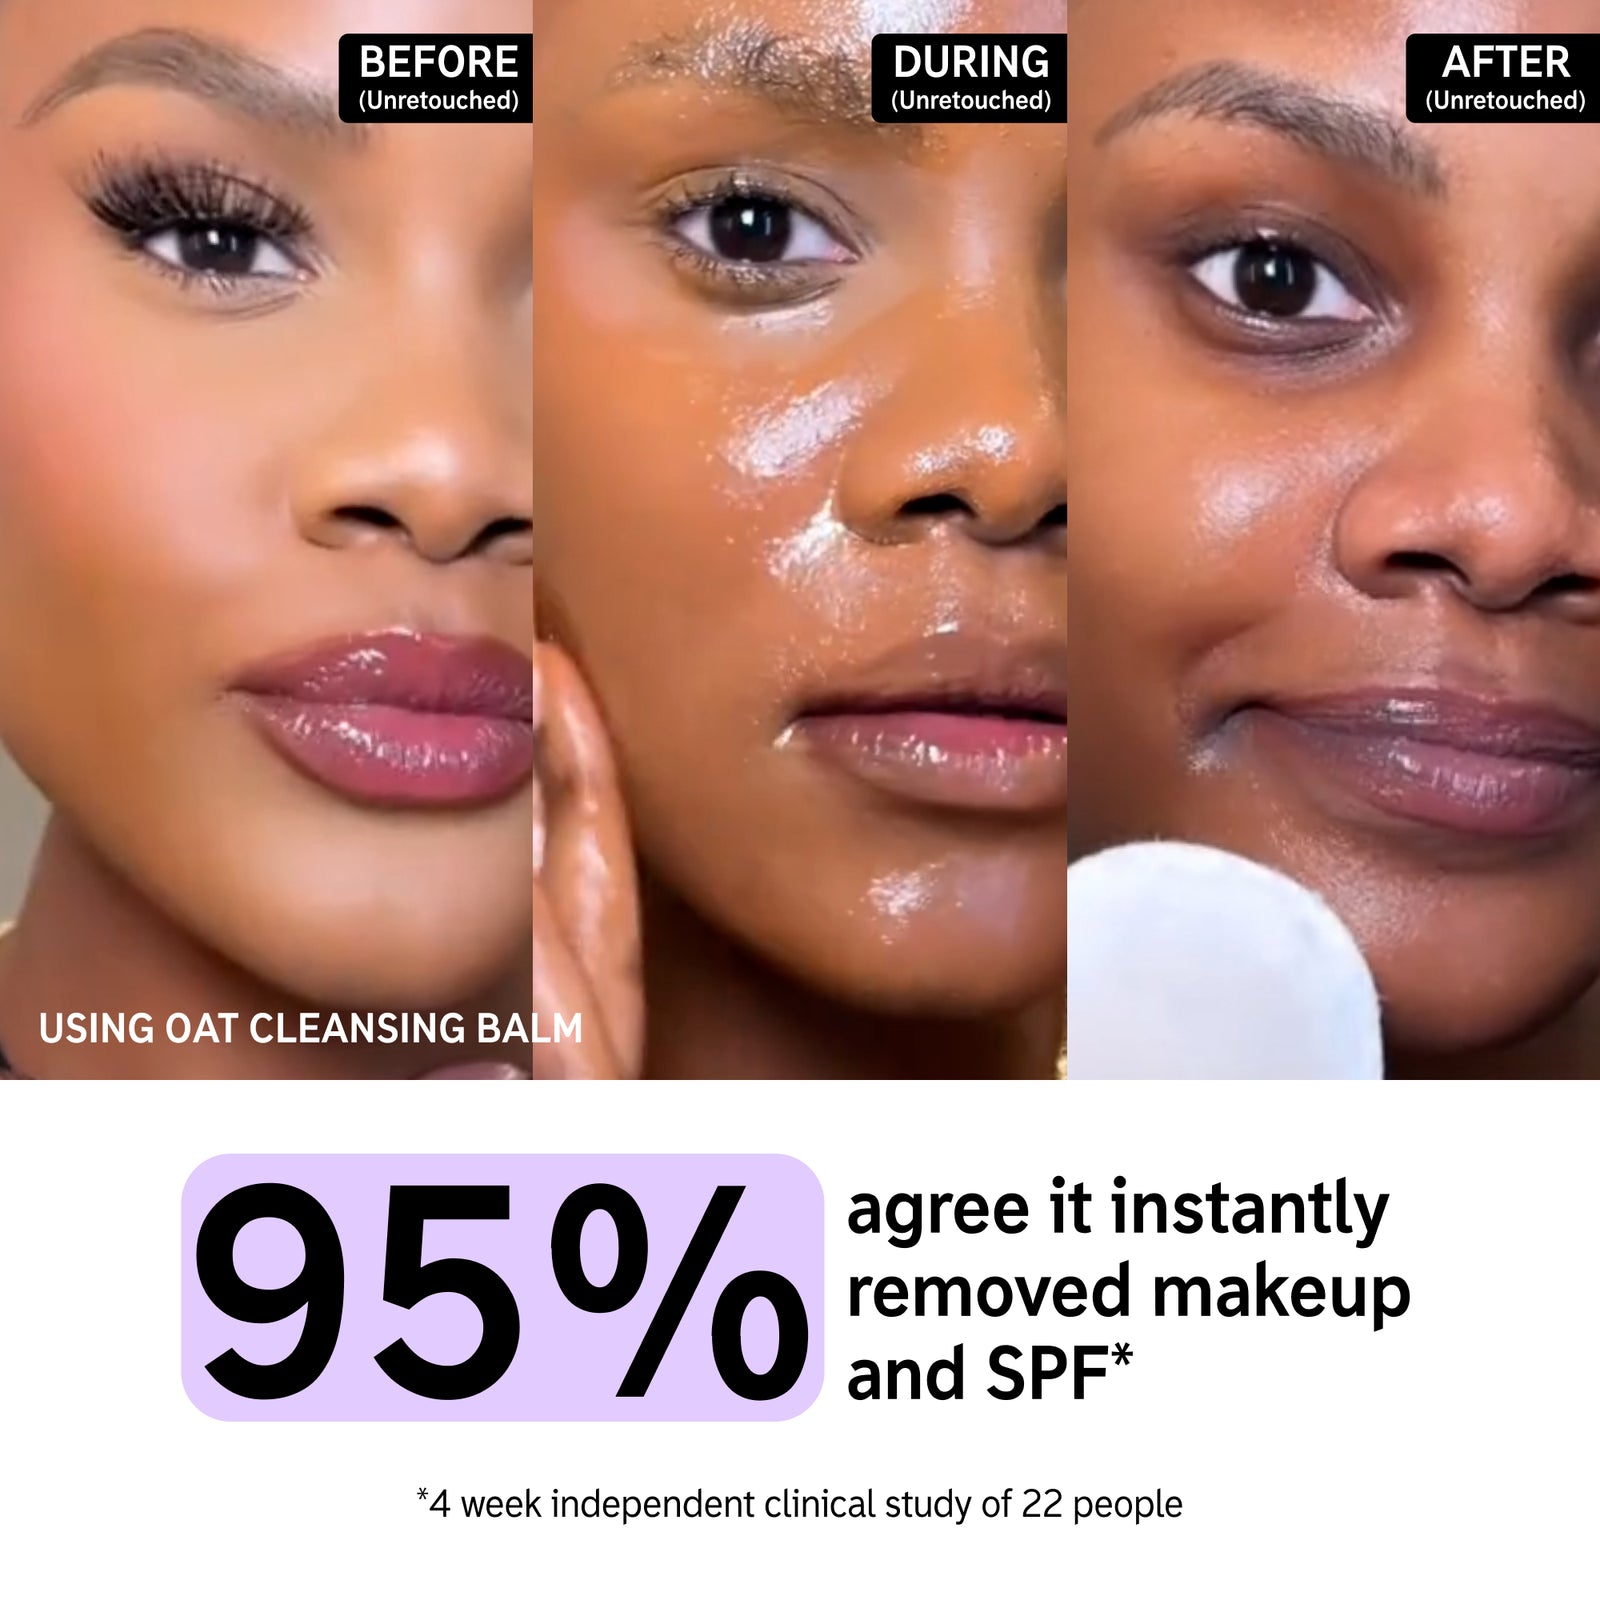 Before and after using Oat Cleansing Balm with key claim statistic